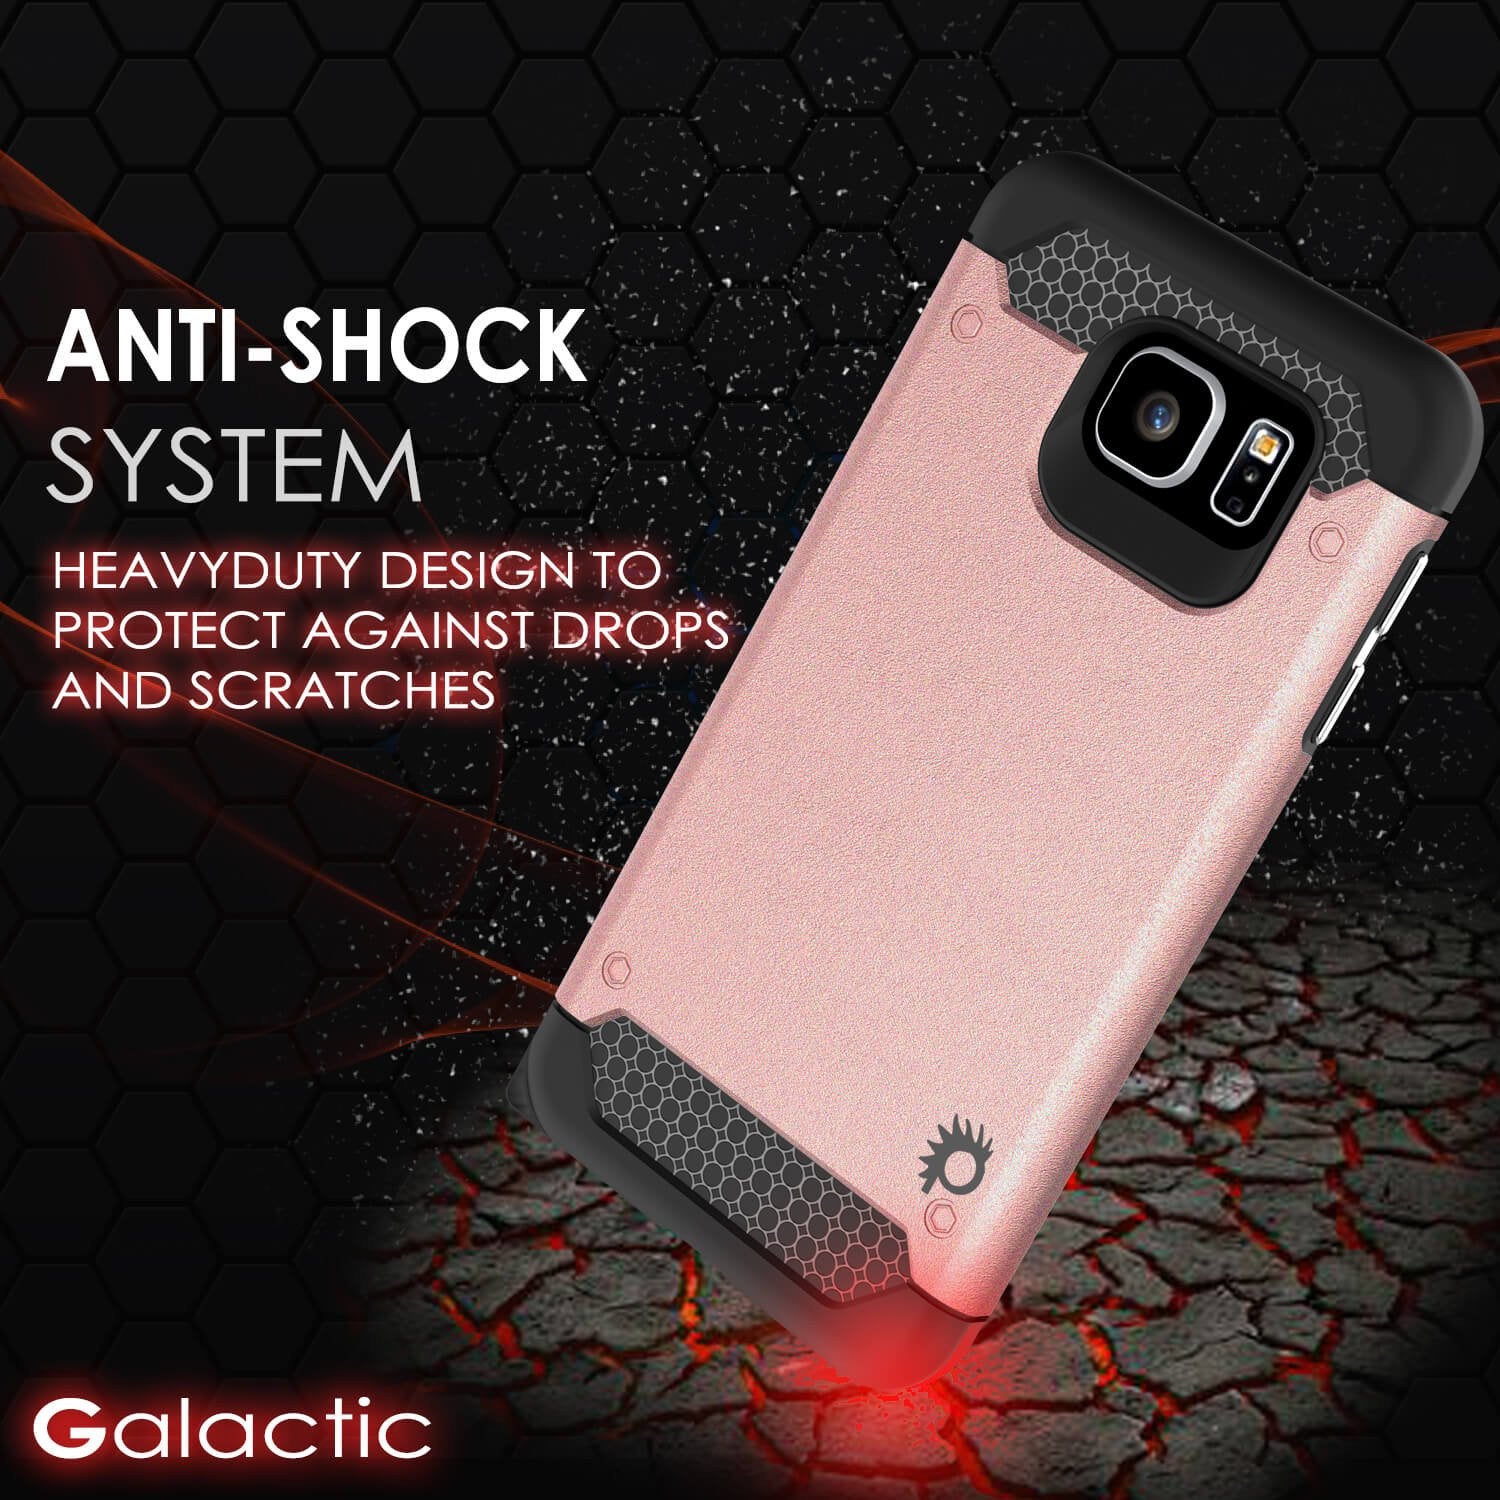 Galaxy s6 Case PunkCase Galactic Rose Gold Series Slim Armor Soft Cover Case w/ Tempered Glass - PunkCase NZ